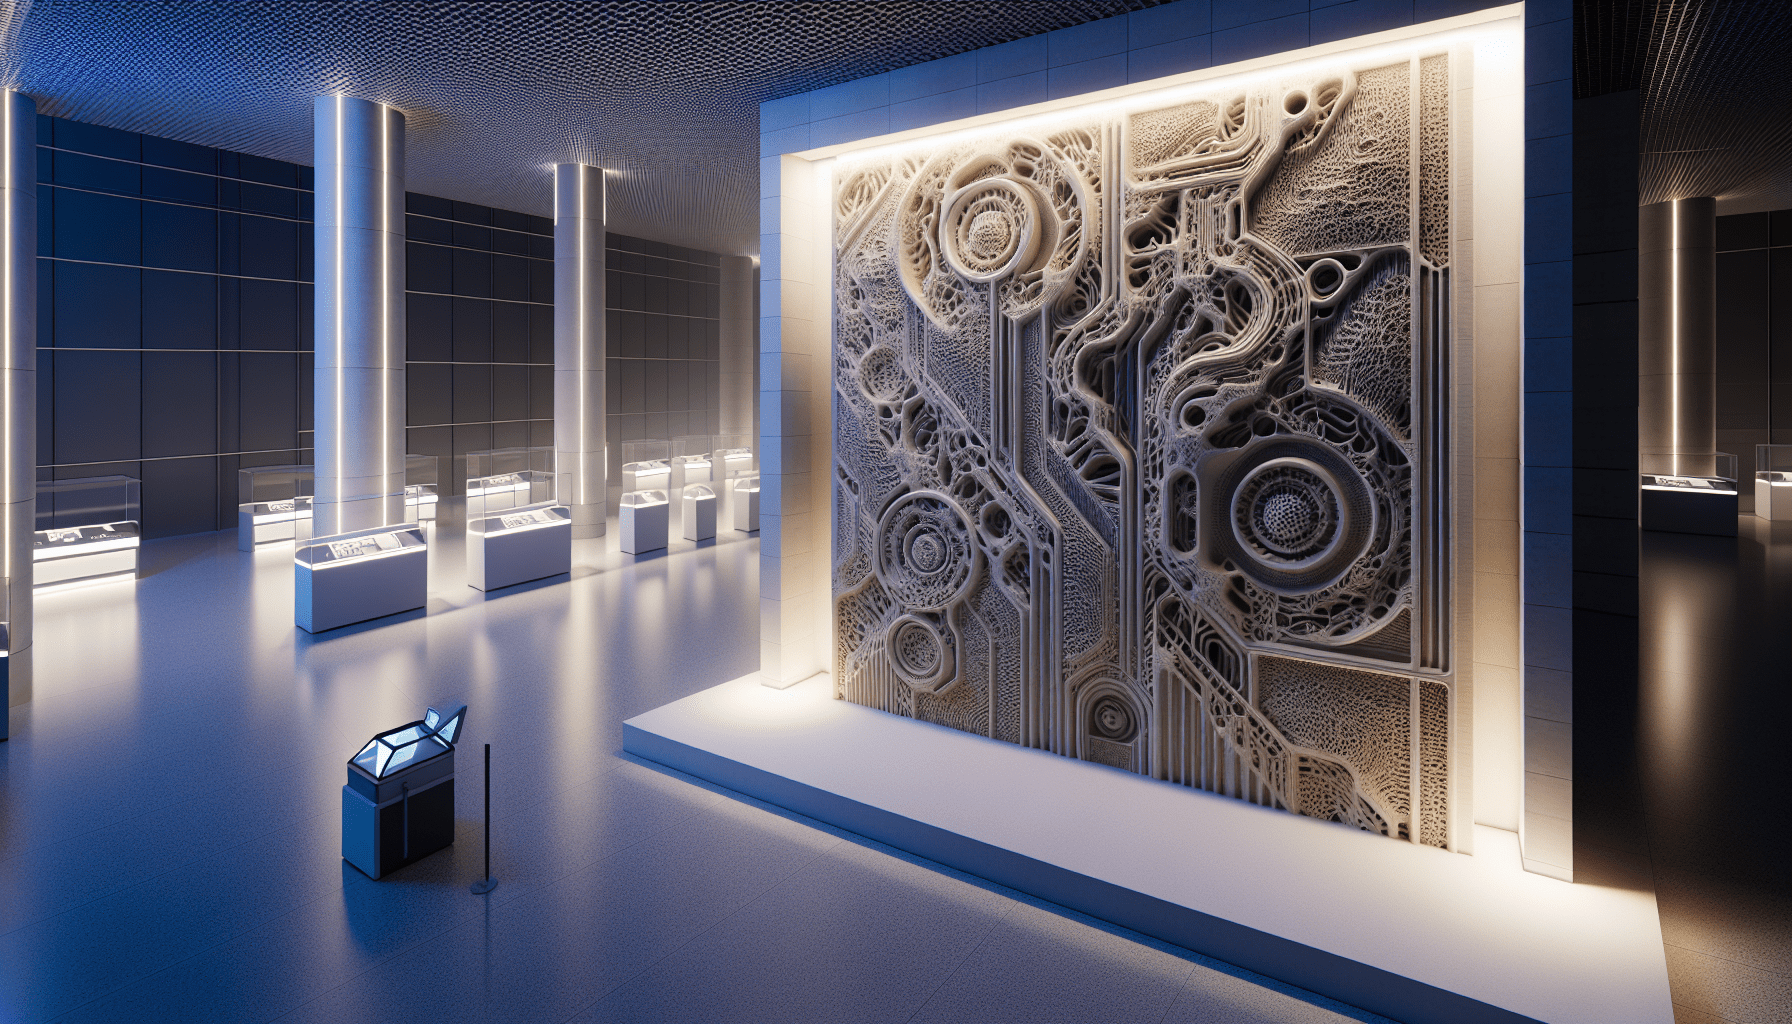 most-intricate-3d-printed-wall-made-from-sand-unveiled-at-museum-of-the-future Most intricate 3D-printed wall made from sand unveiled at Museum of the Future